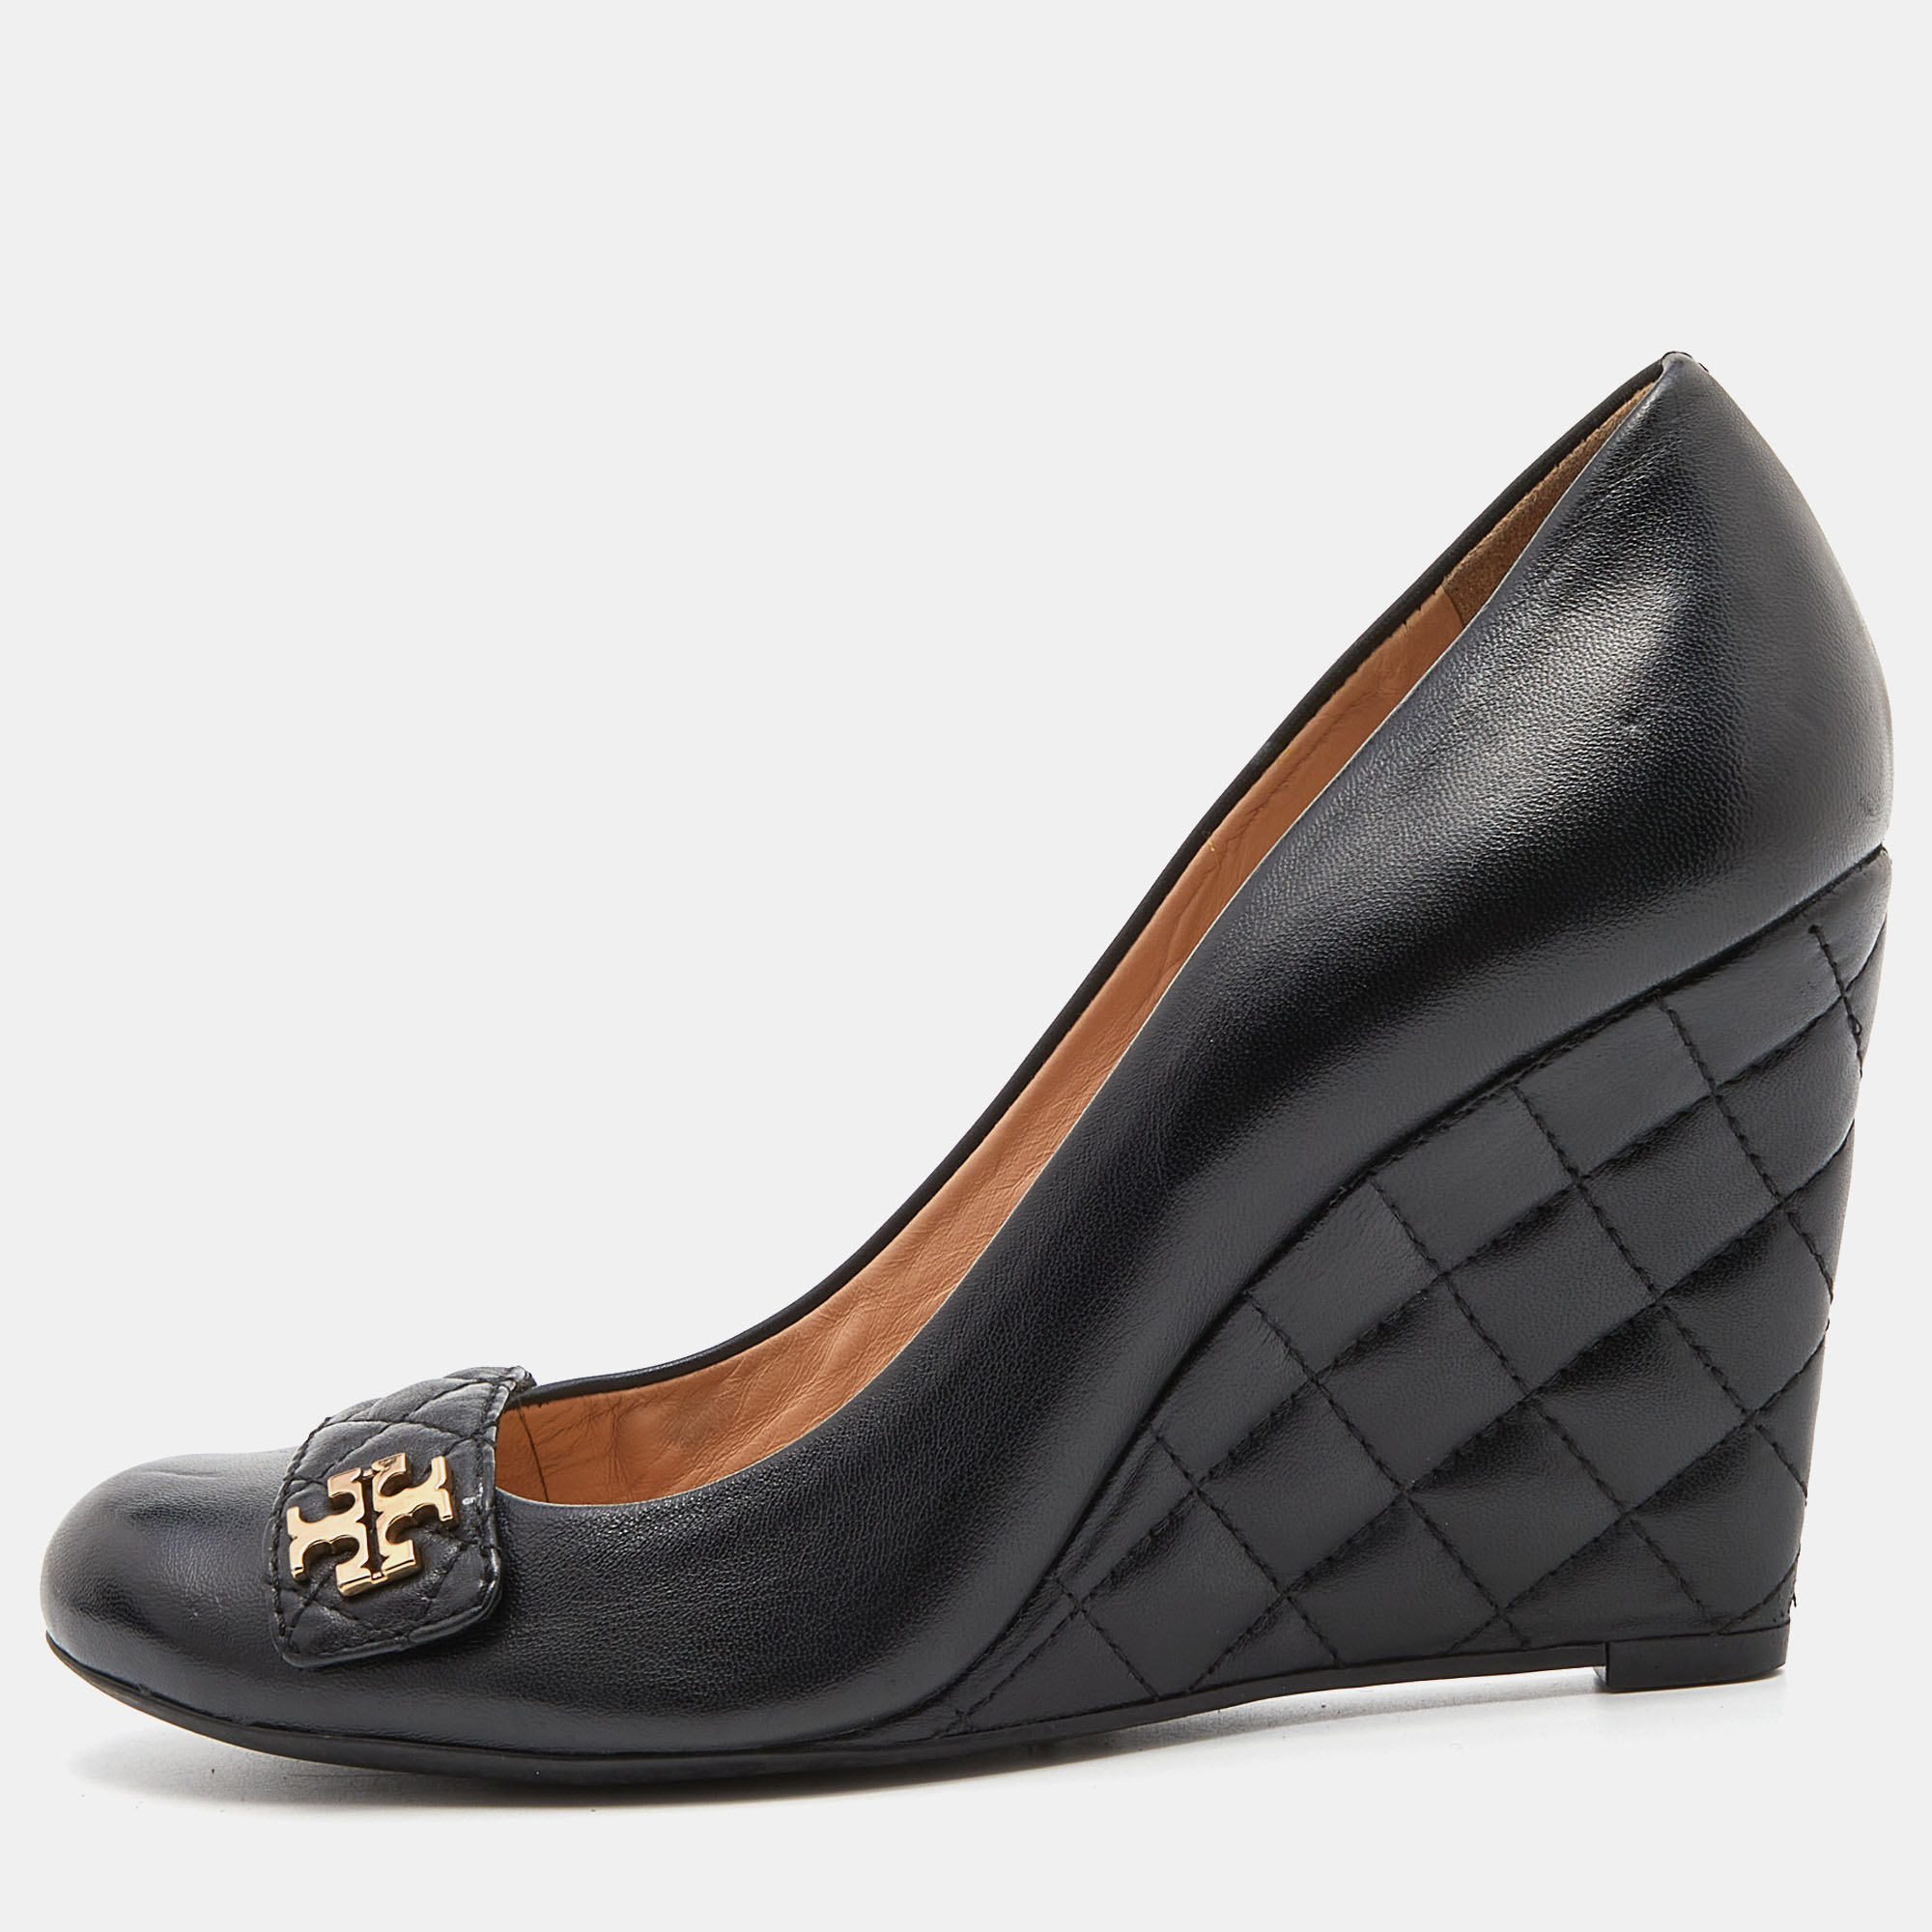 Pre-owned Tory Burch Black Quilted Leather Leila Wedge Pumps Size 40.5